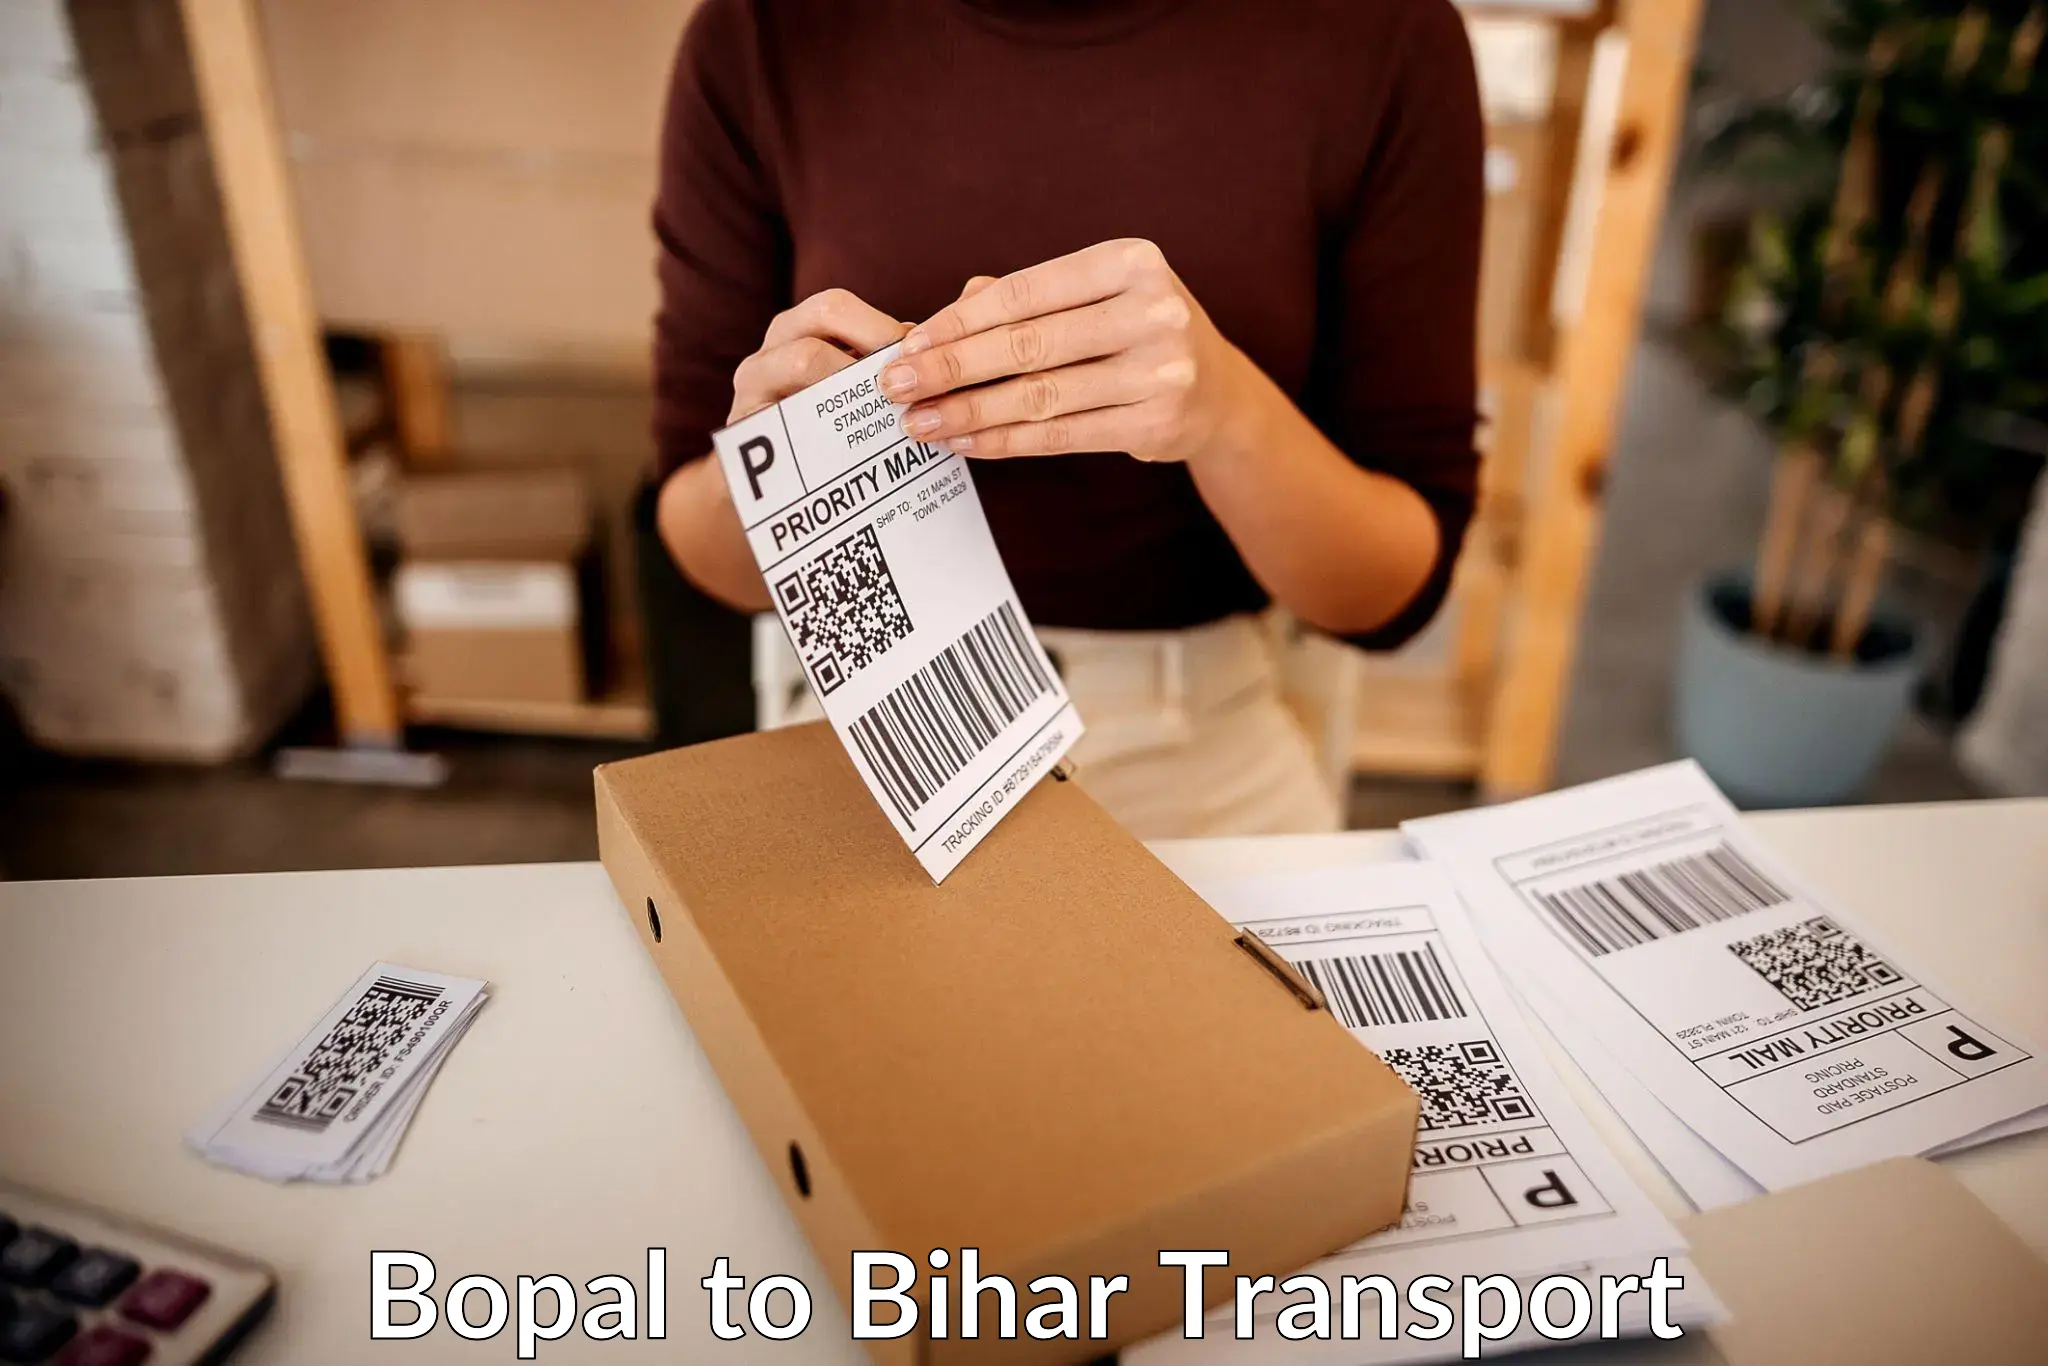 Goods transport services Bopal to Dhaka